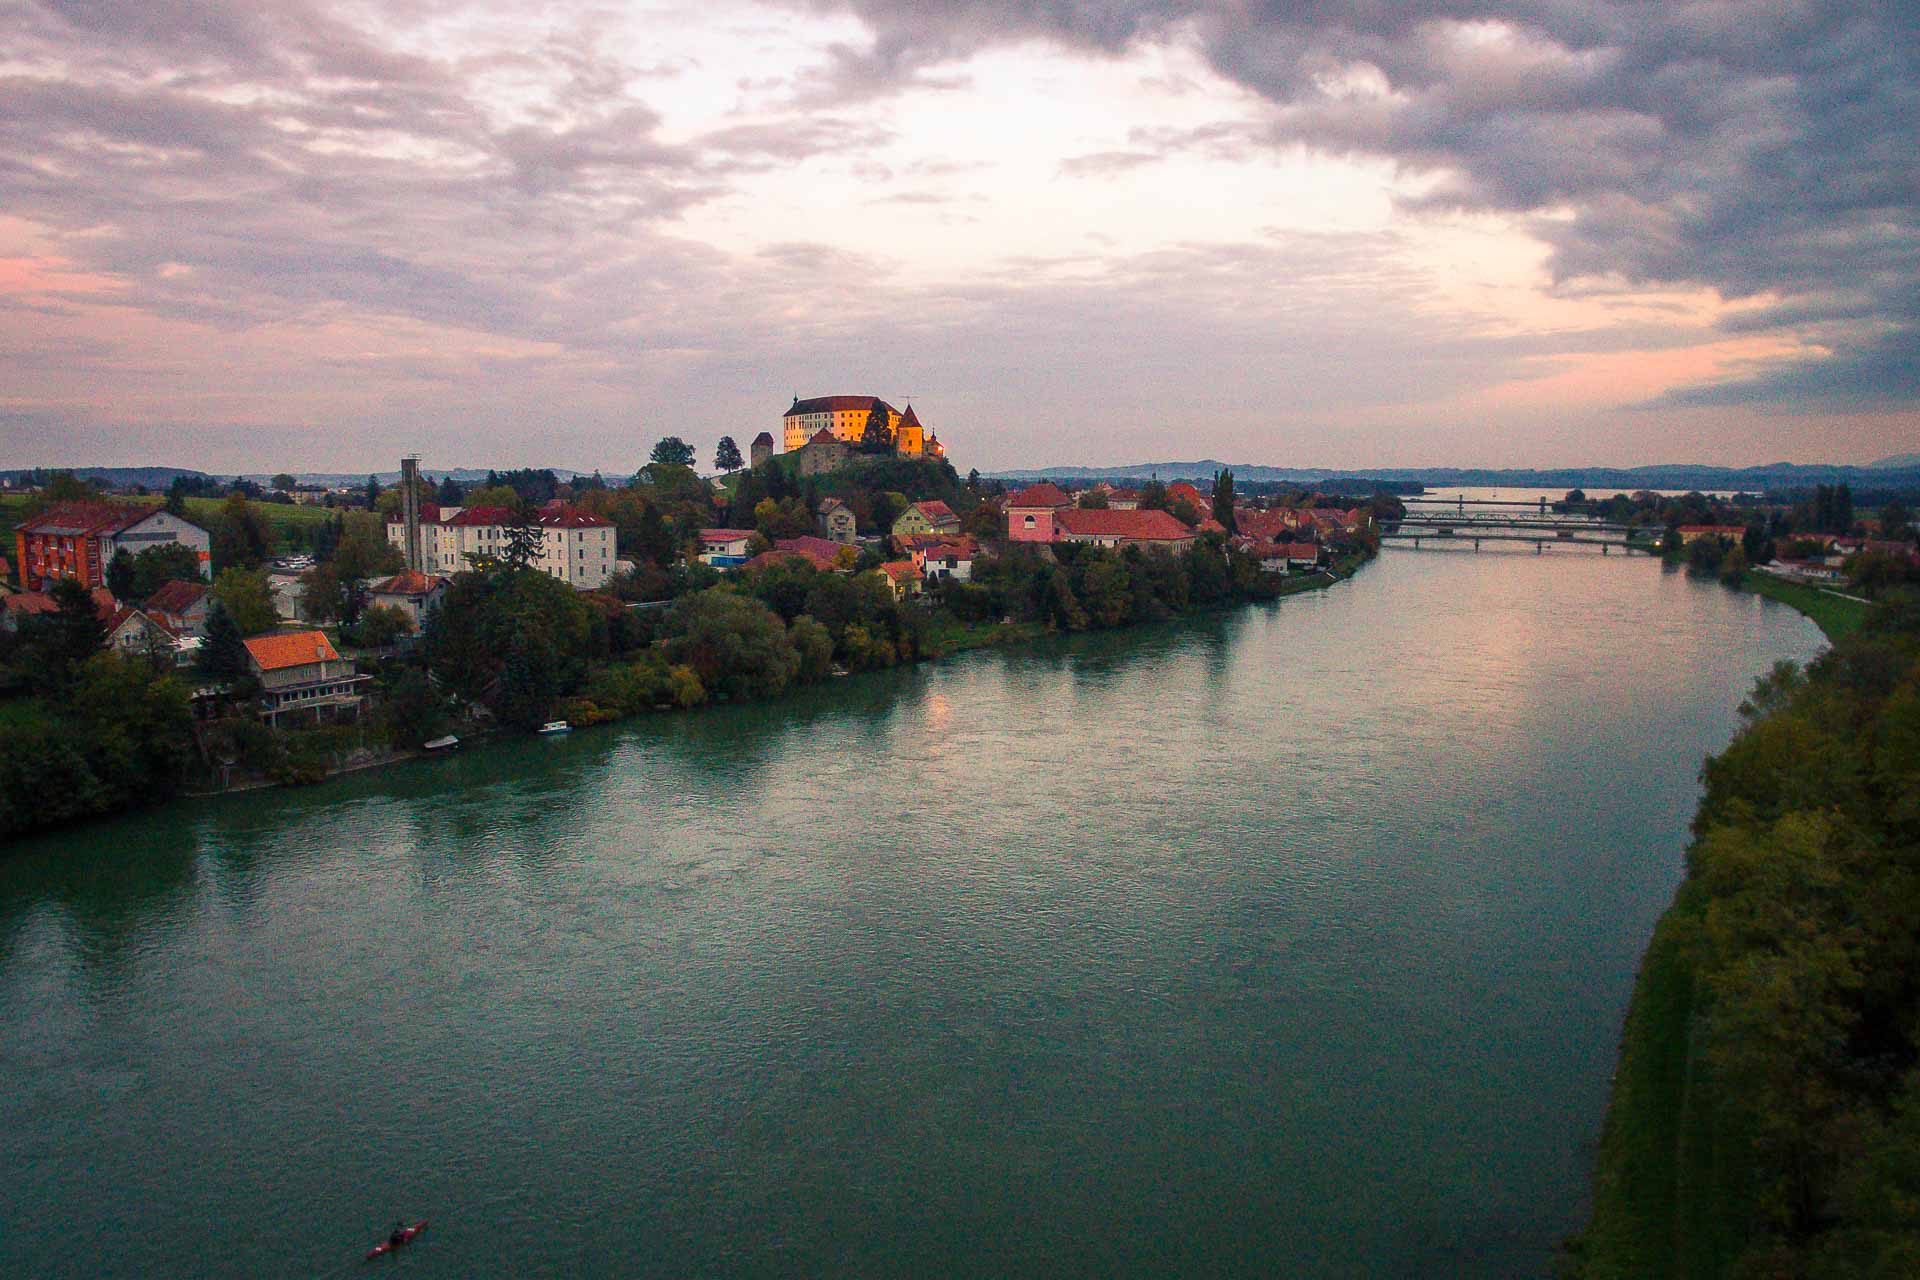 A large river crossing the city with a castle on top of the mountain and a pinkish sky